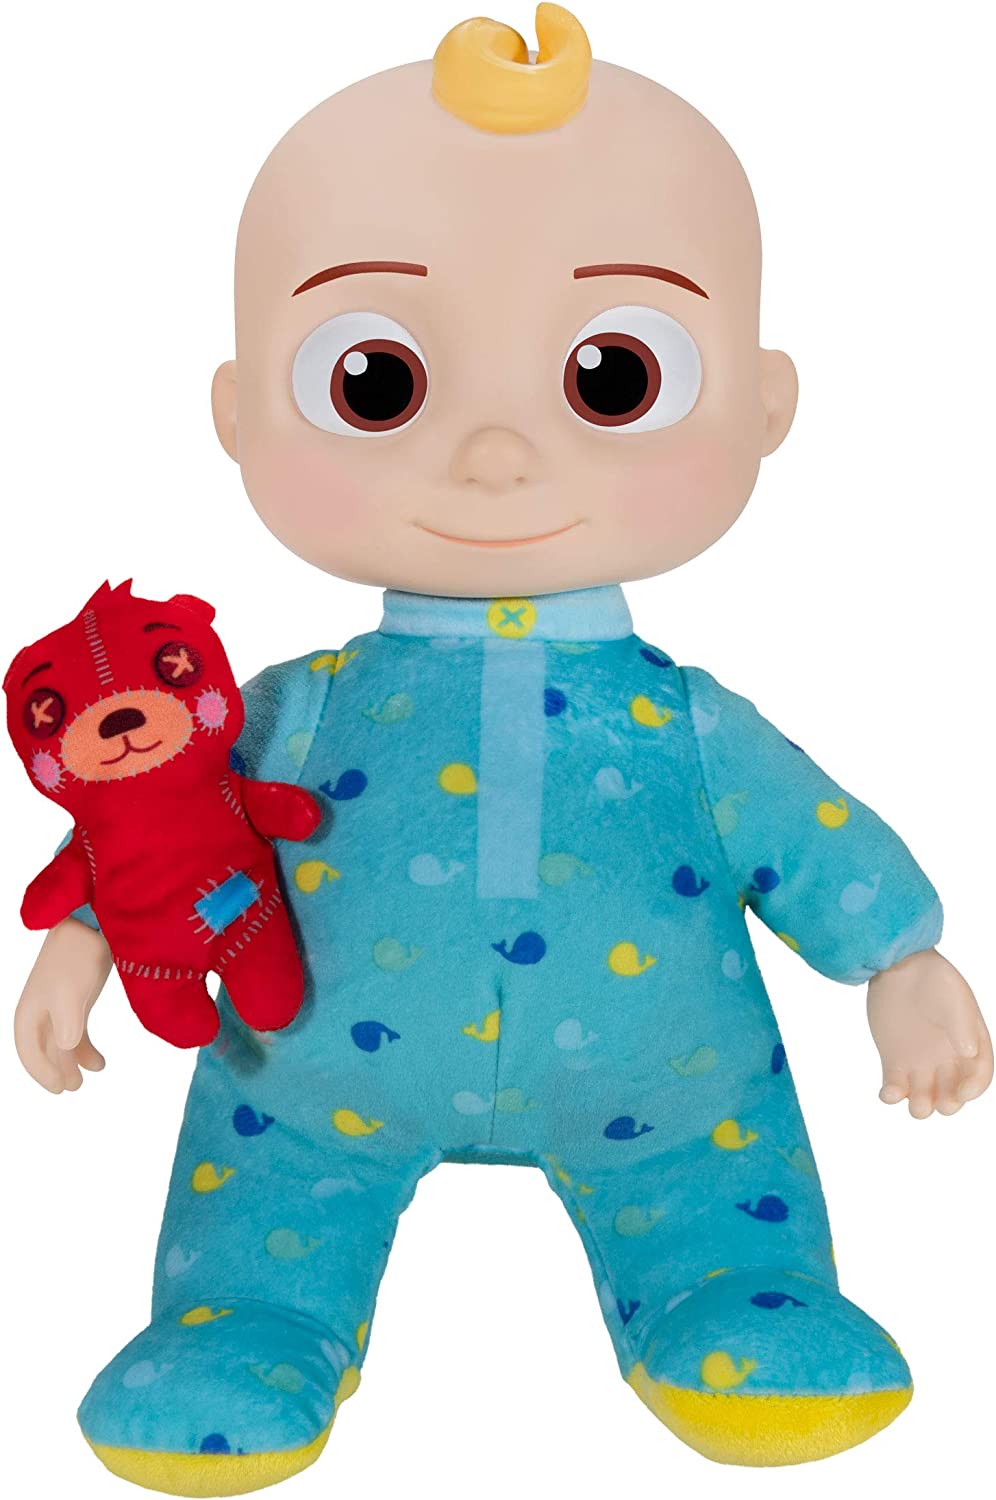 Cocomelon Official Musical Bedtime JJ Doll, Soft Plush Body – Press Tummy and JJ Sings Clips from ‘Yes, Yes, Bedtime Song,’ – Includes Feature Plush and Small Pillow Plush Teddy Bear, Multi